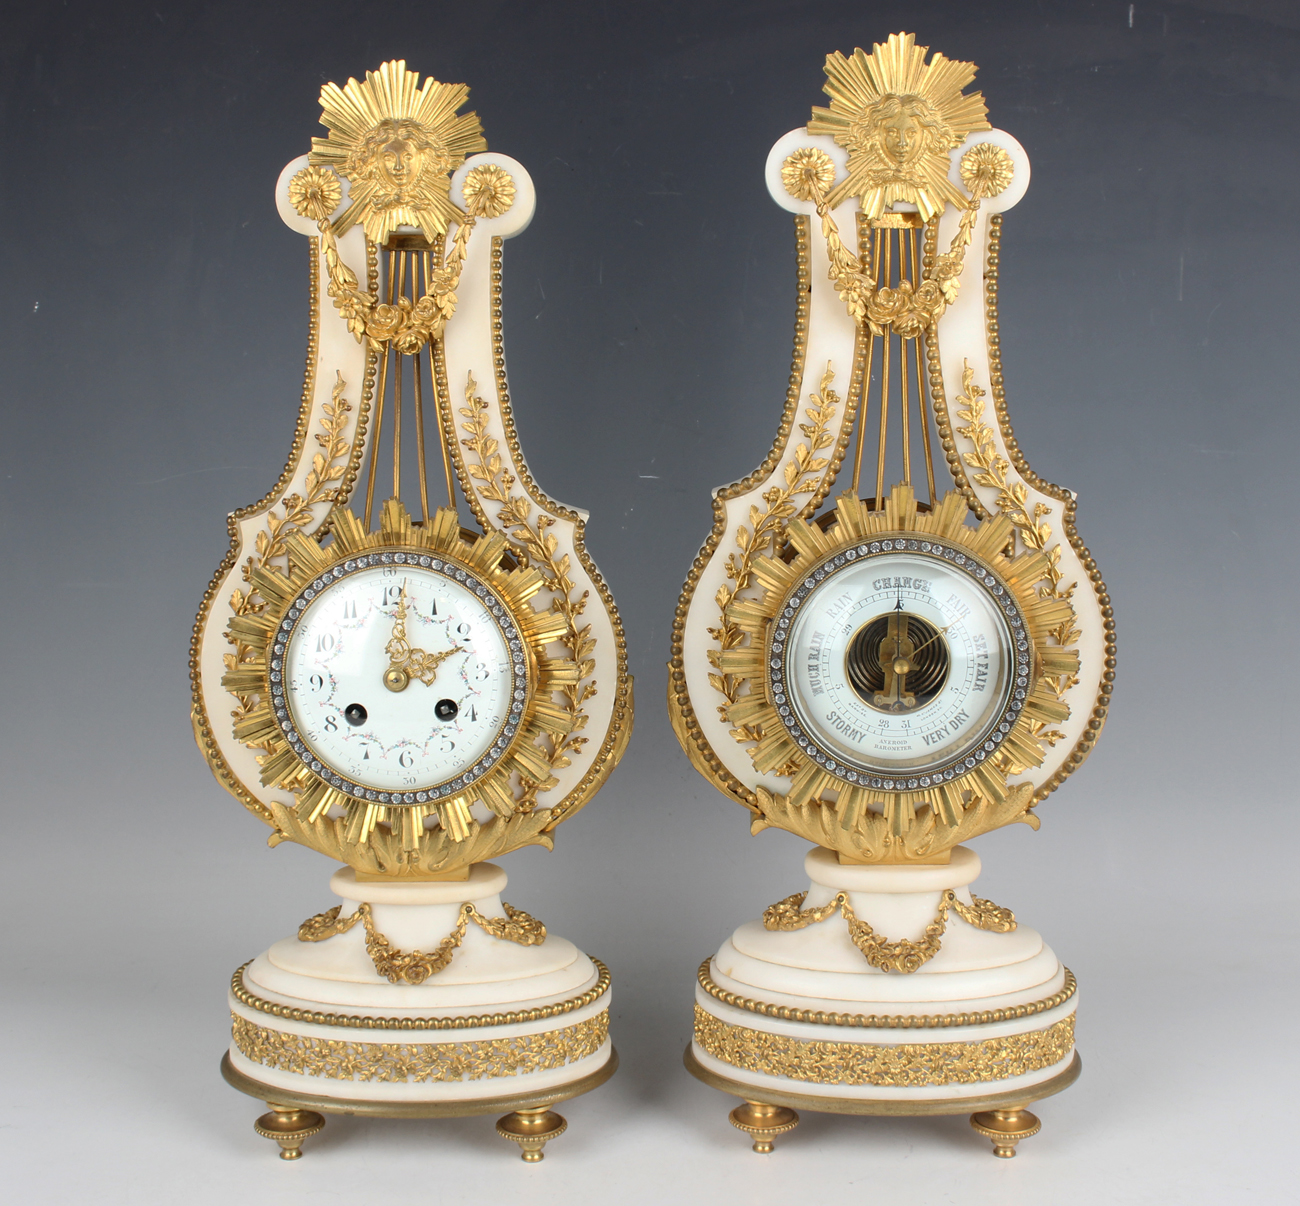 A late 19th century French ormolu mounted white marble Marie Antoinette style mantel clock and